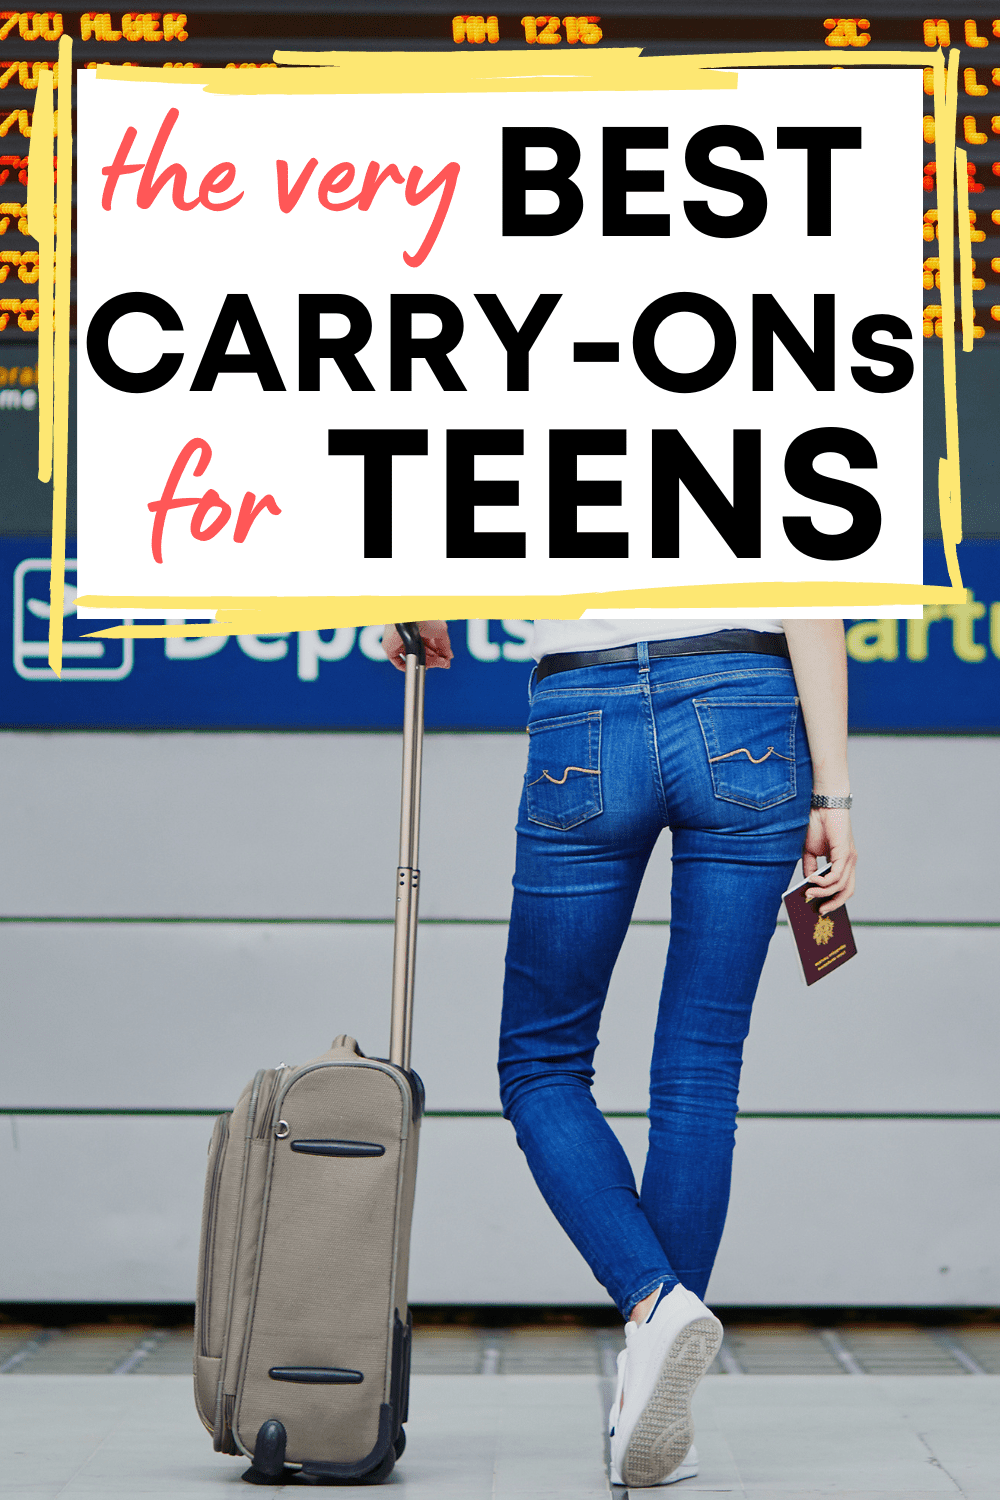 Best Carry-On Suitcase for Teens